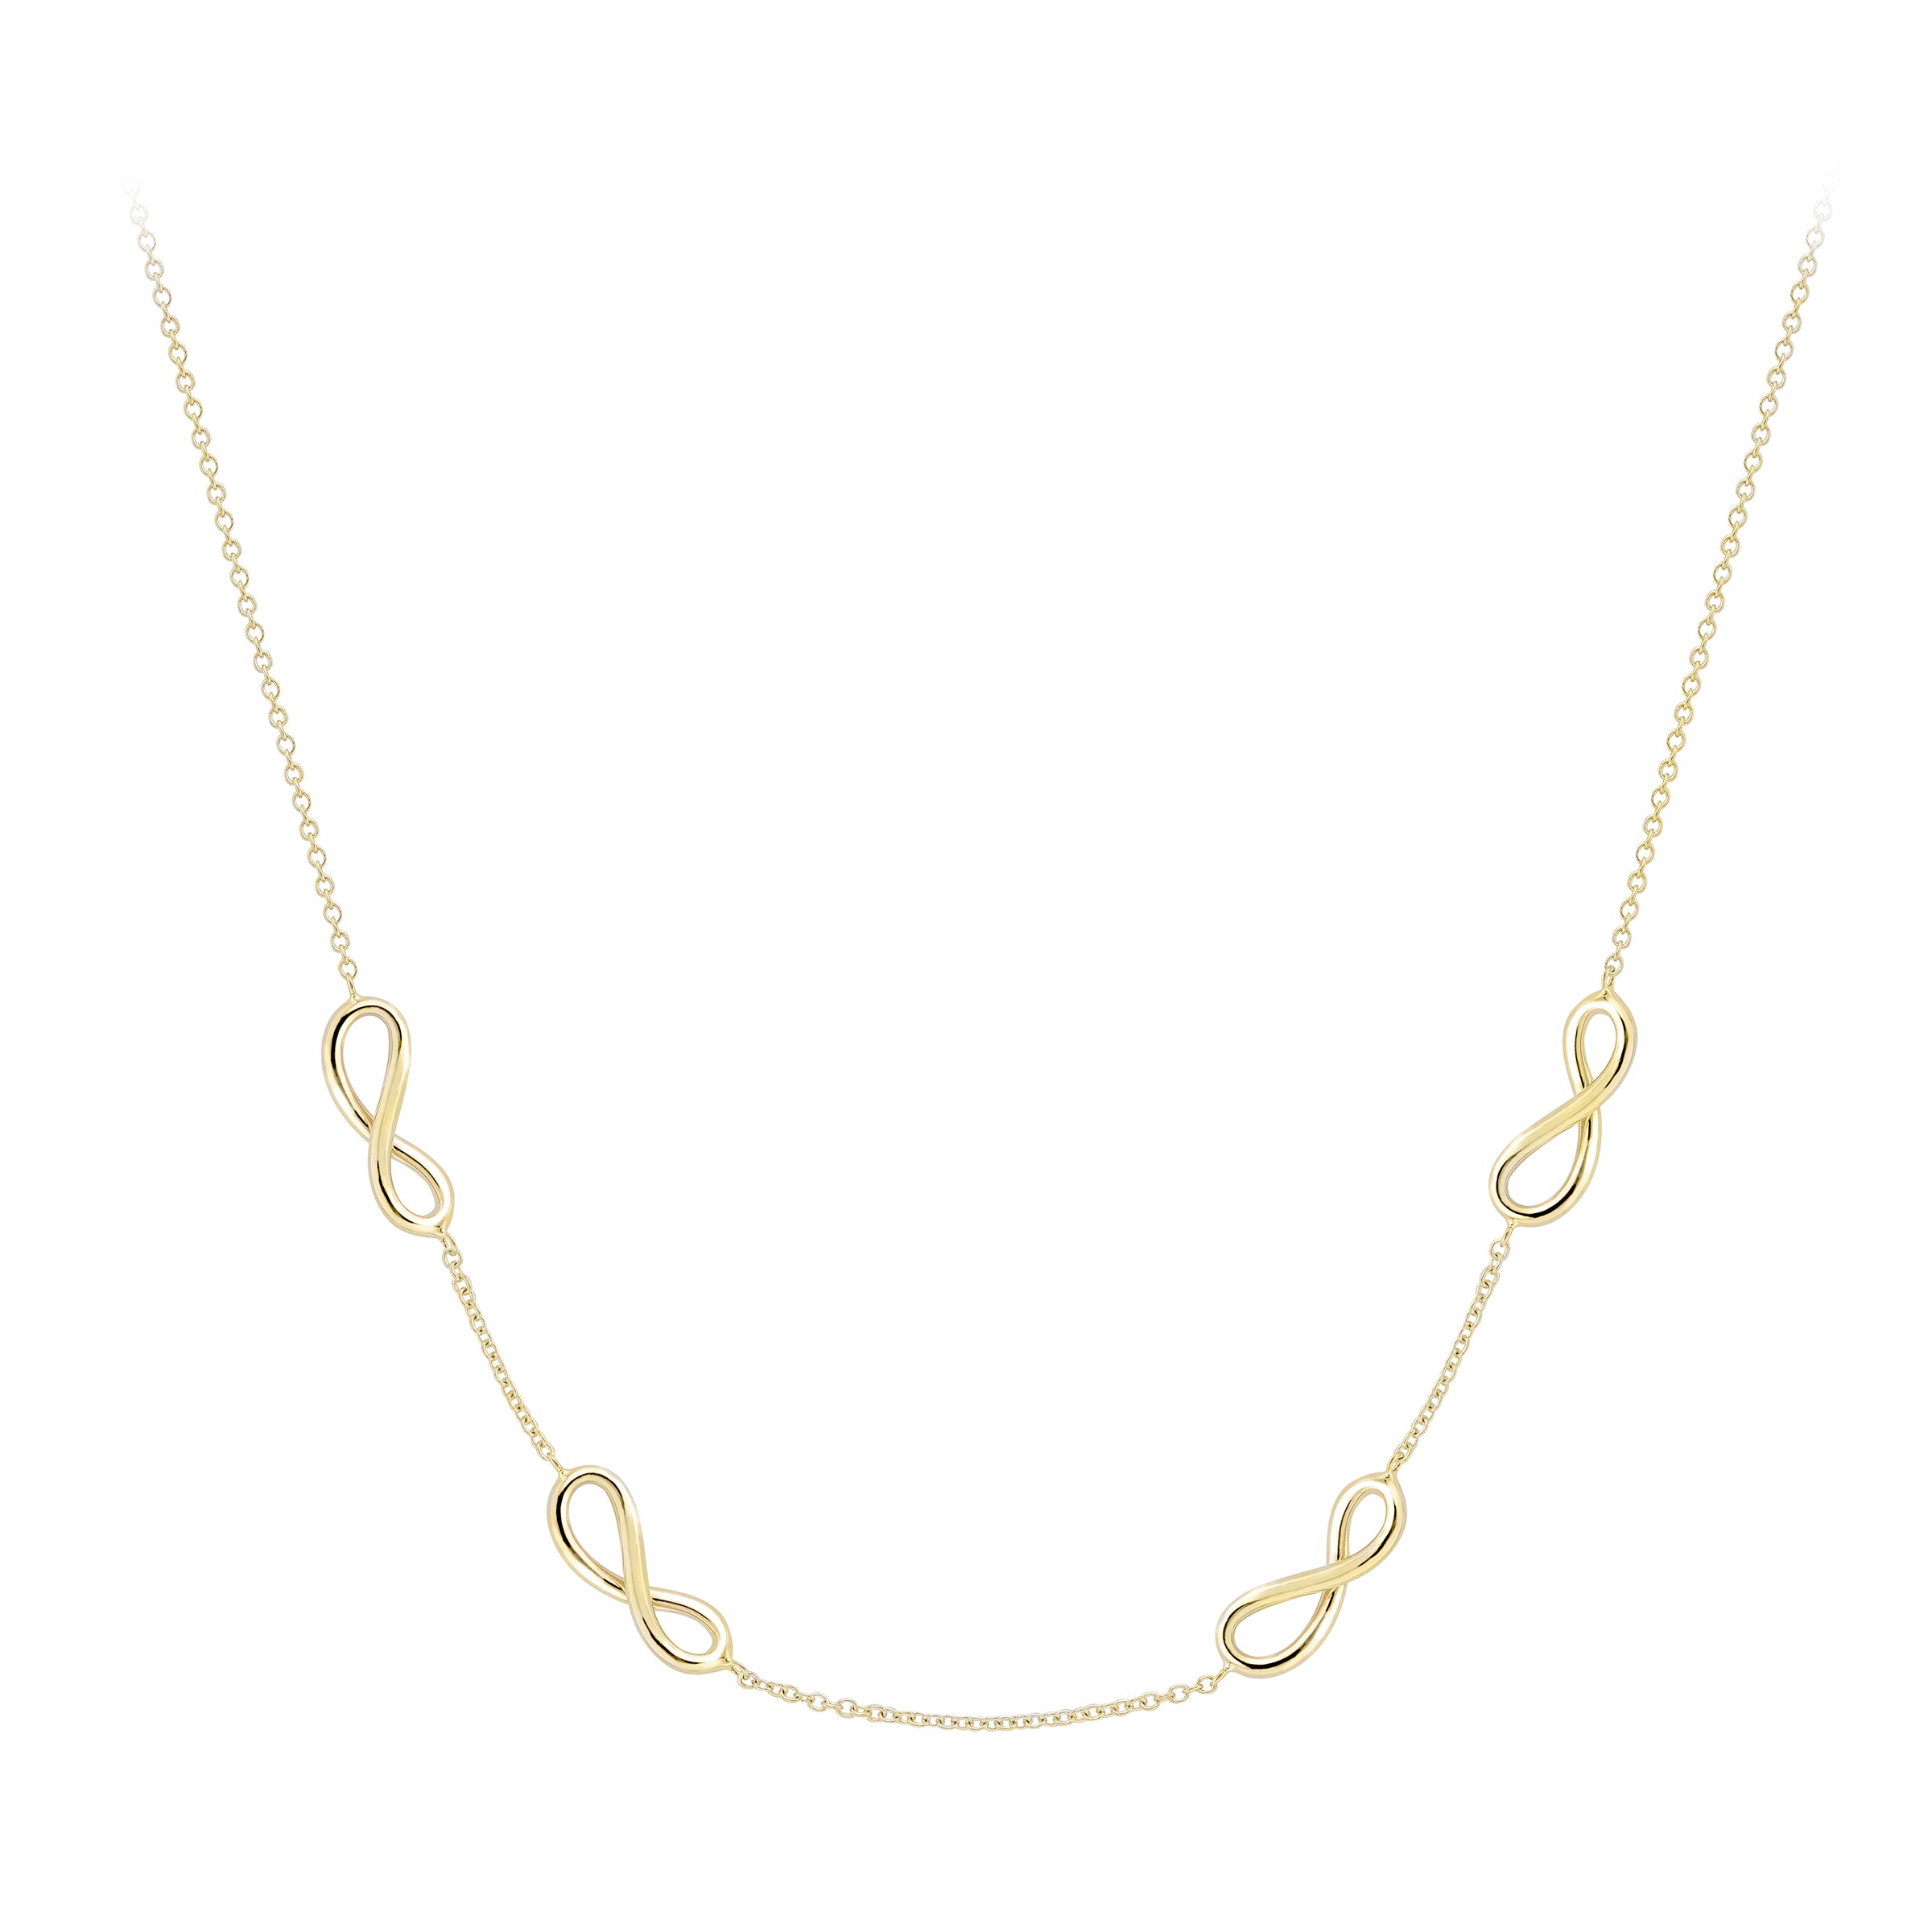 9ct. Yellow Gold Fancy Necklace